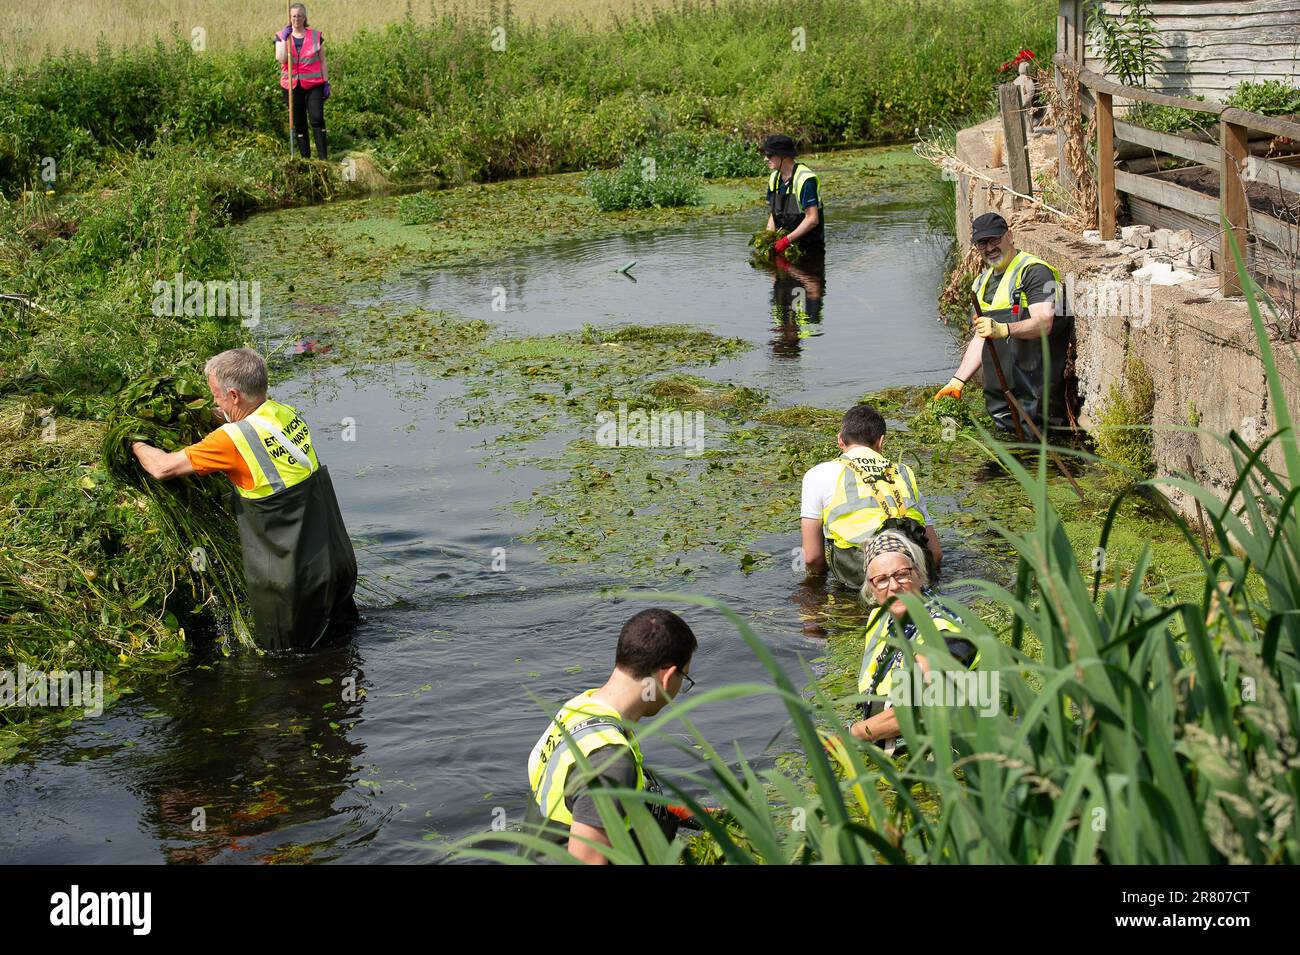 Eton Wick, UK. 18th June, 2023. Local residents and volunteers from the Eton Wick Waterways Group near Windsor in Berkshire who are supported by Thames 21, were clearing weeds from Boveney Ditch in Eton Wick today so as to improve the flow of water in the waterway. They work to conserve and protect  the natural environment and wildlife surrounding the Eton Wick waterways. Joining them to clear the weeds were newly elected Windsor, Eton and Eton Wick Liberal Democrats Councillors, Devon Davies and Mark Wilson. Frank O’Kelly a Councillor from nearby Slough also joined the clear up. Eton Town Cou Stock Photo